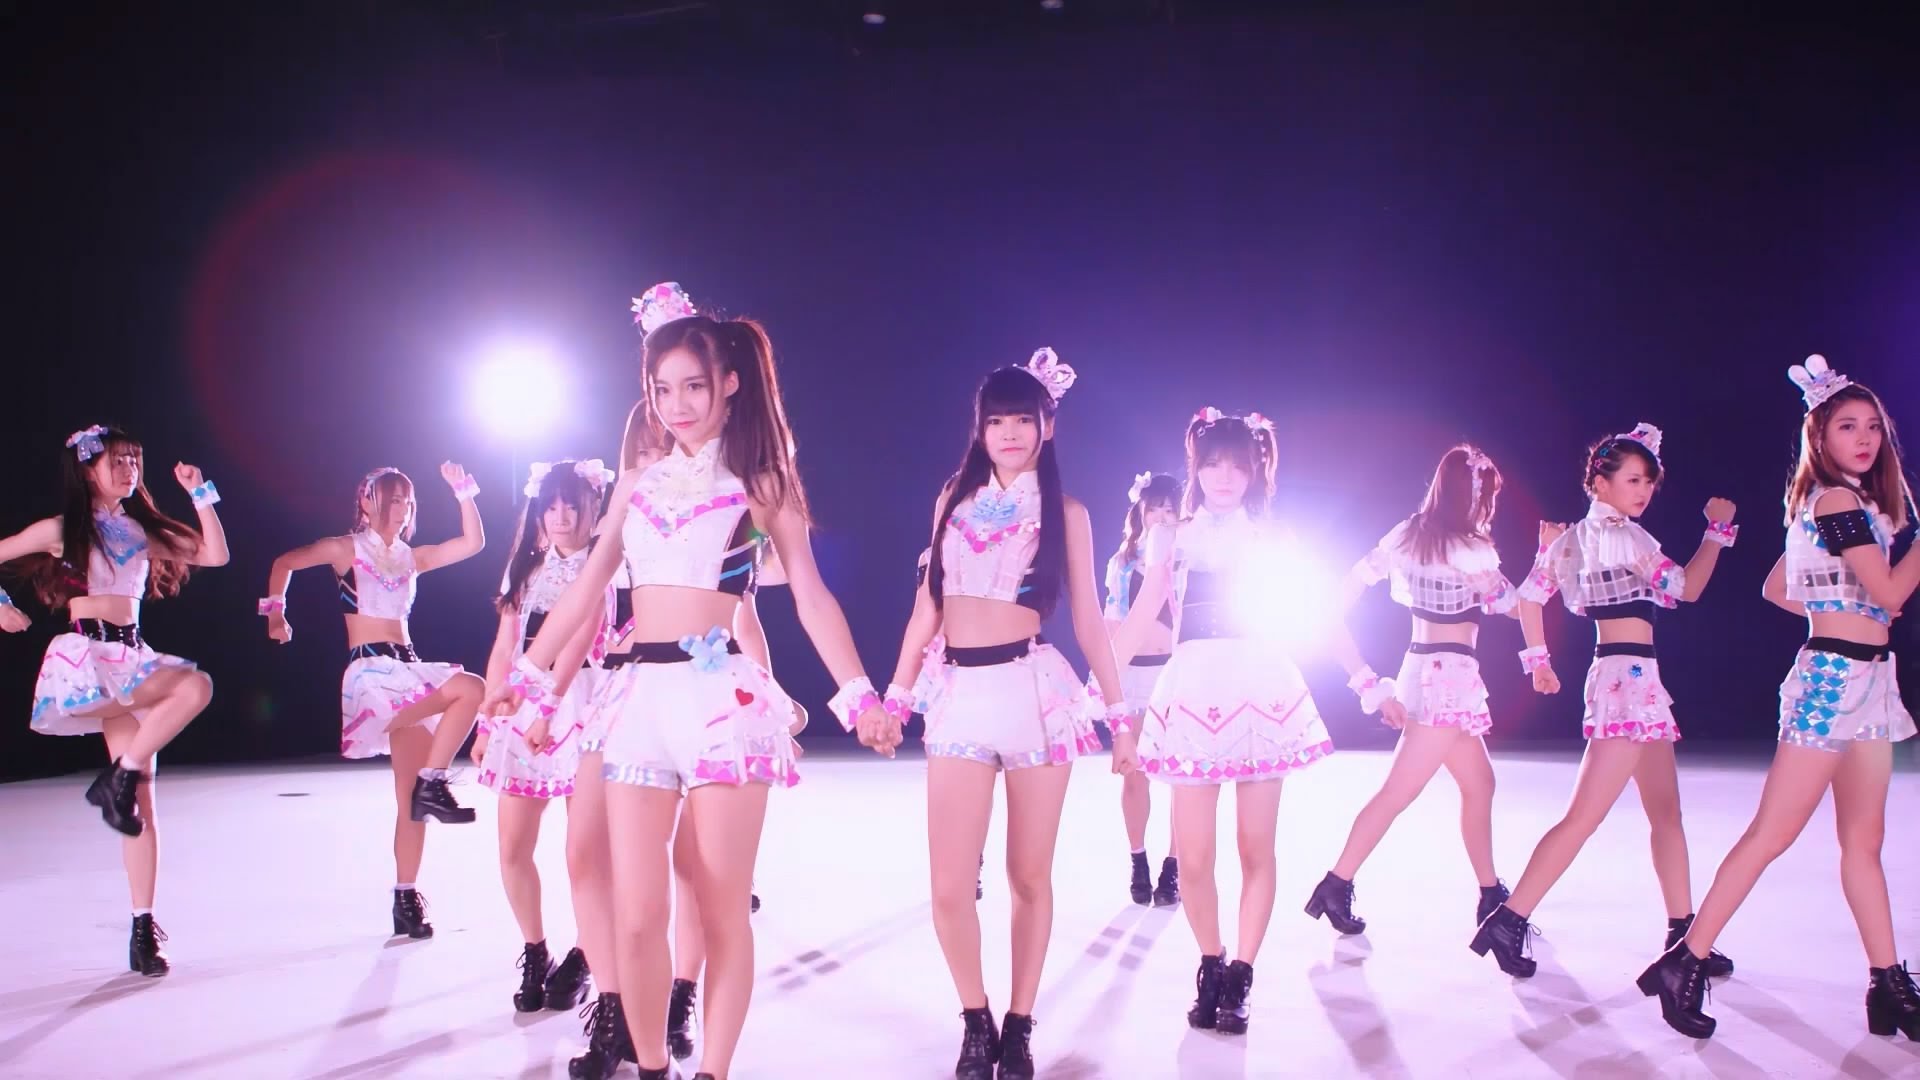 New Moon Rising From Shanghai! Lunar’s MV for “Yoake” with New Japanese Member Revealed